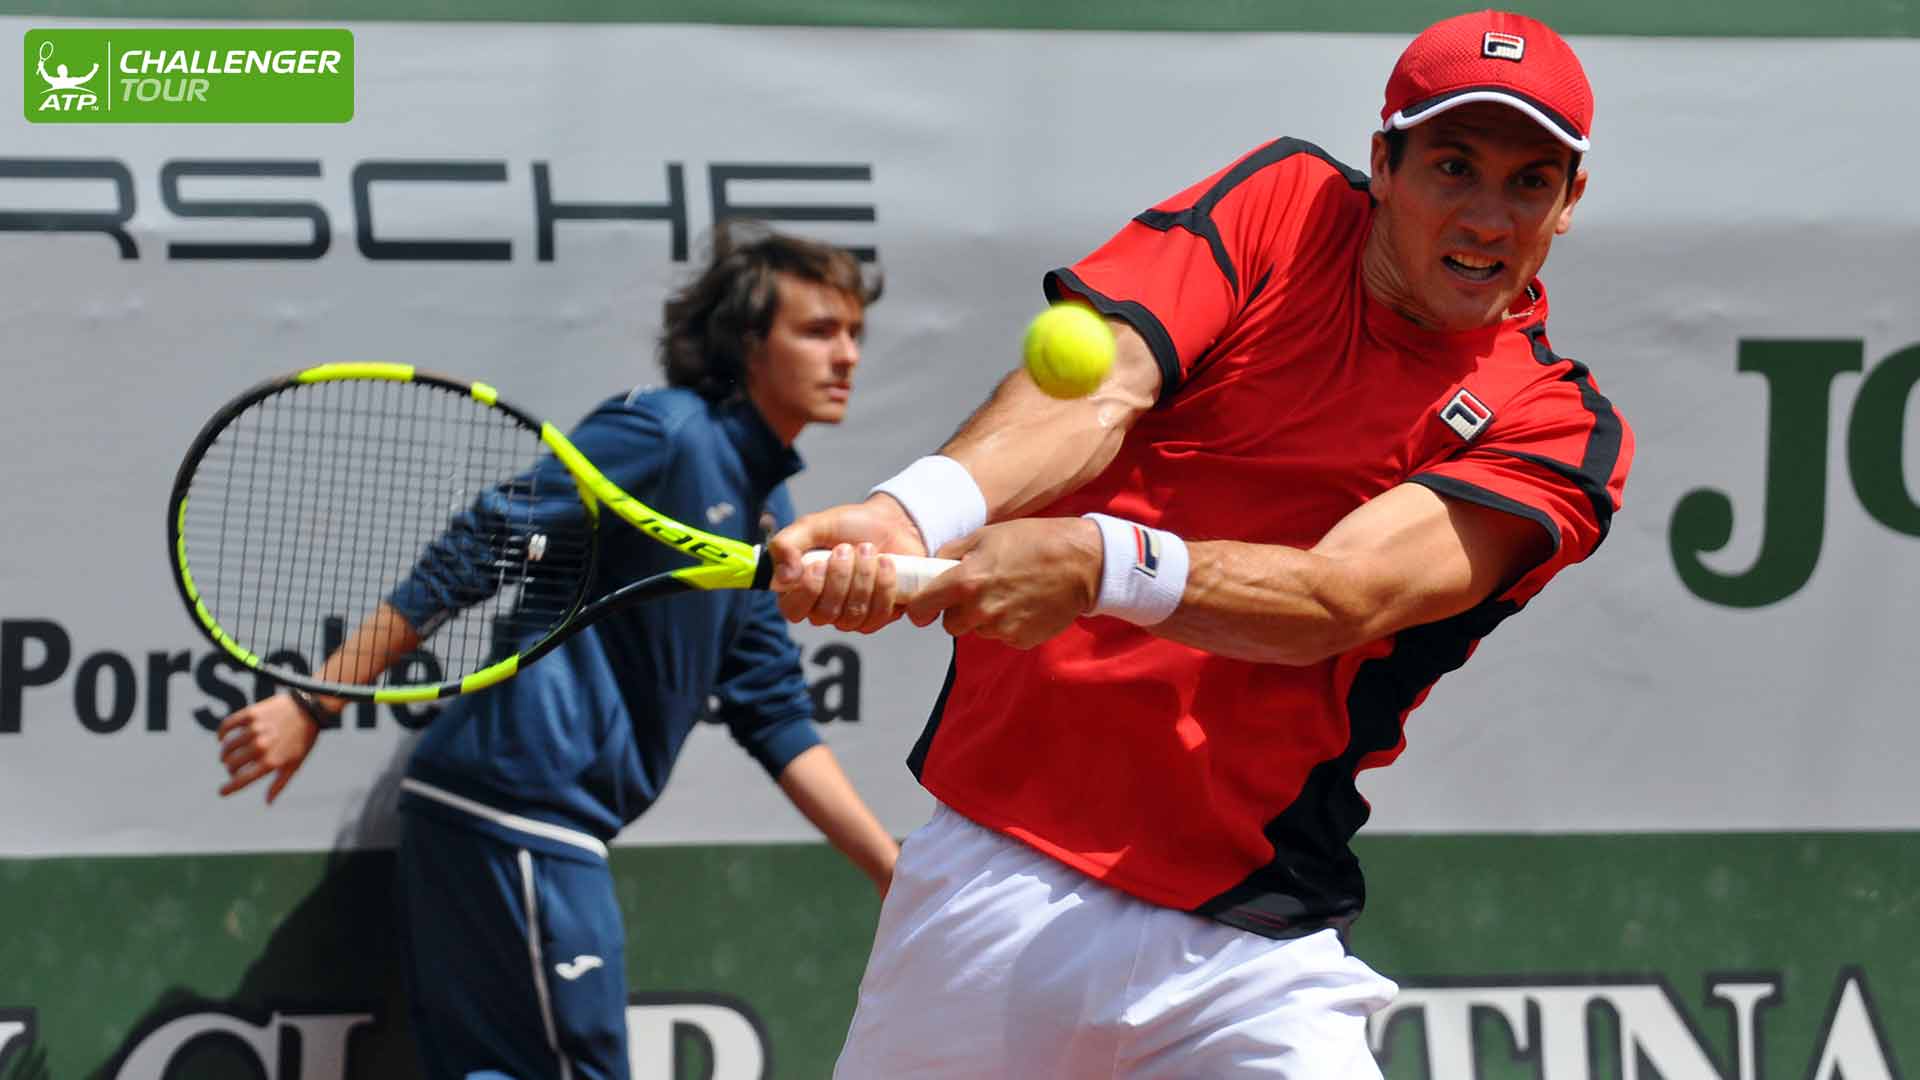 Facundo Bagnis continues to rack up the wins in Cortina.